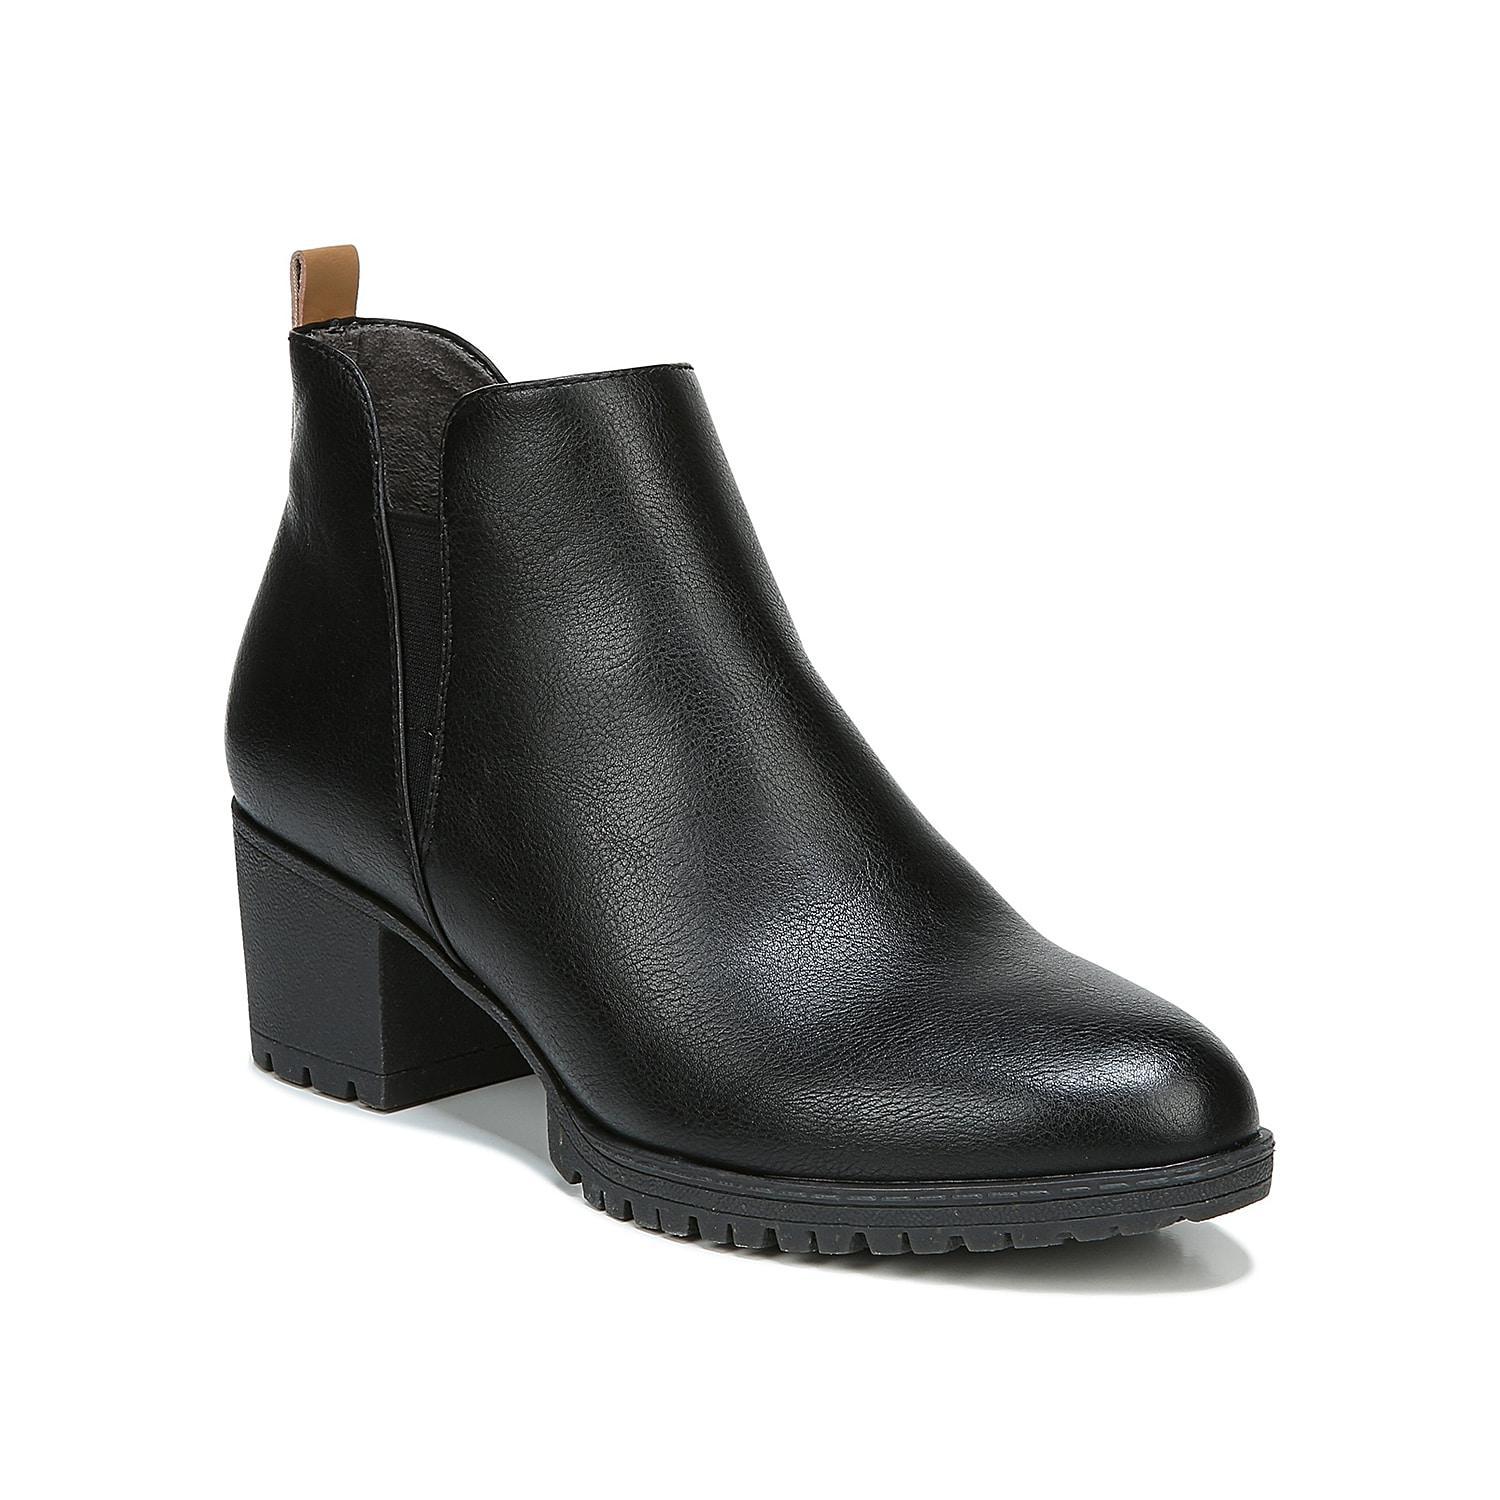 Dr. Scholls London Womens Ankle Boots Black Product Image